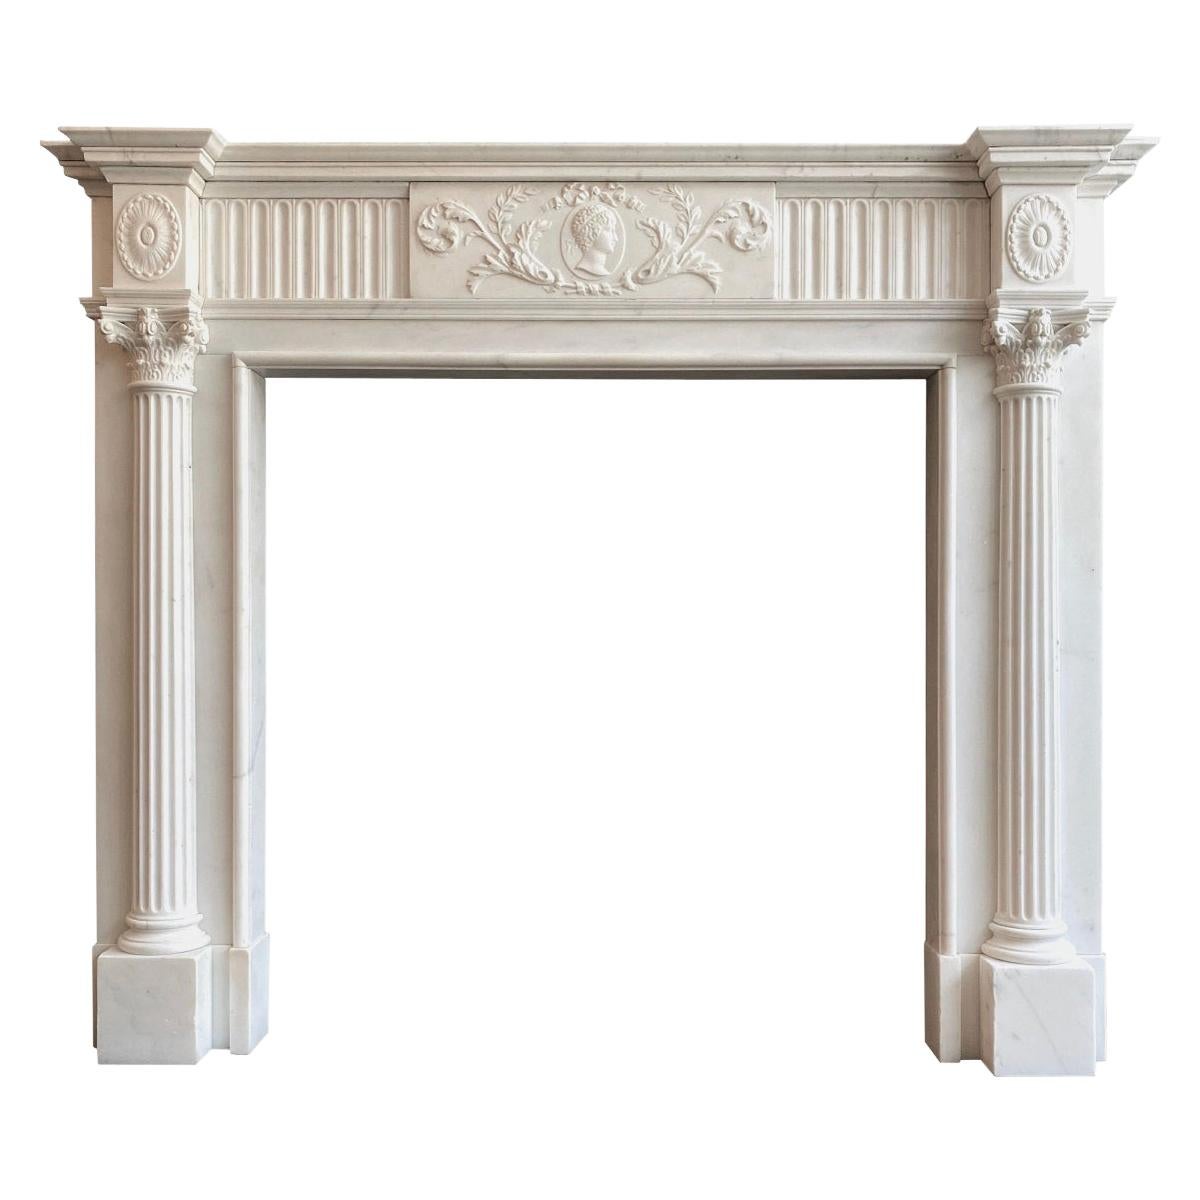 Antique Georgian Neoclassical Fireplace Mantel in Statuary White Marble For Sale